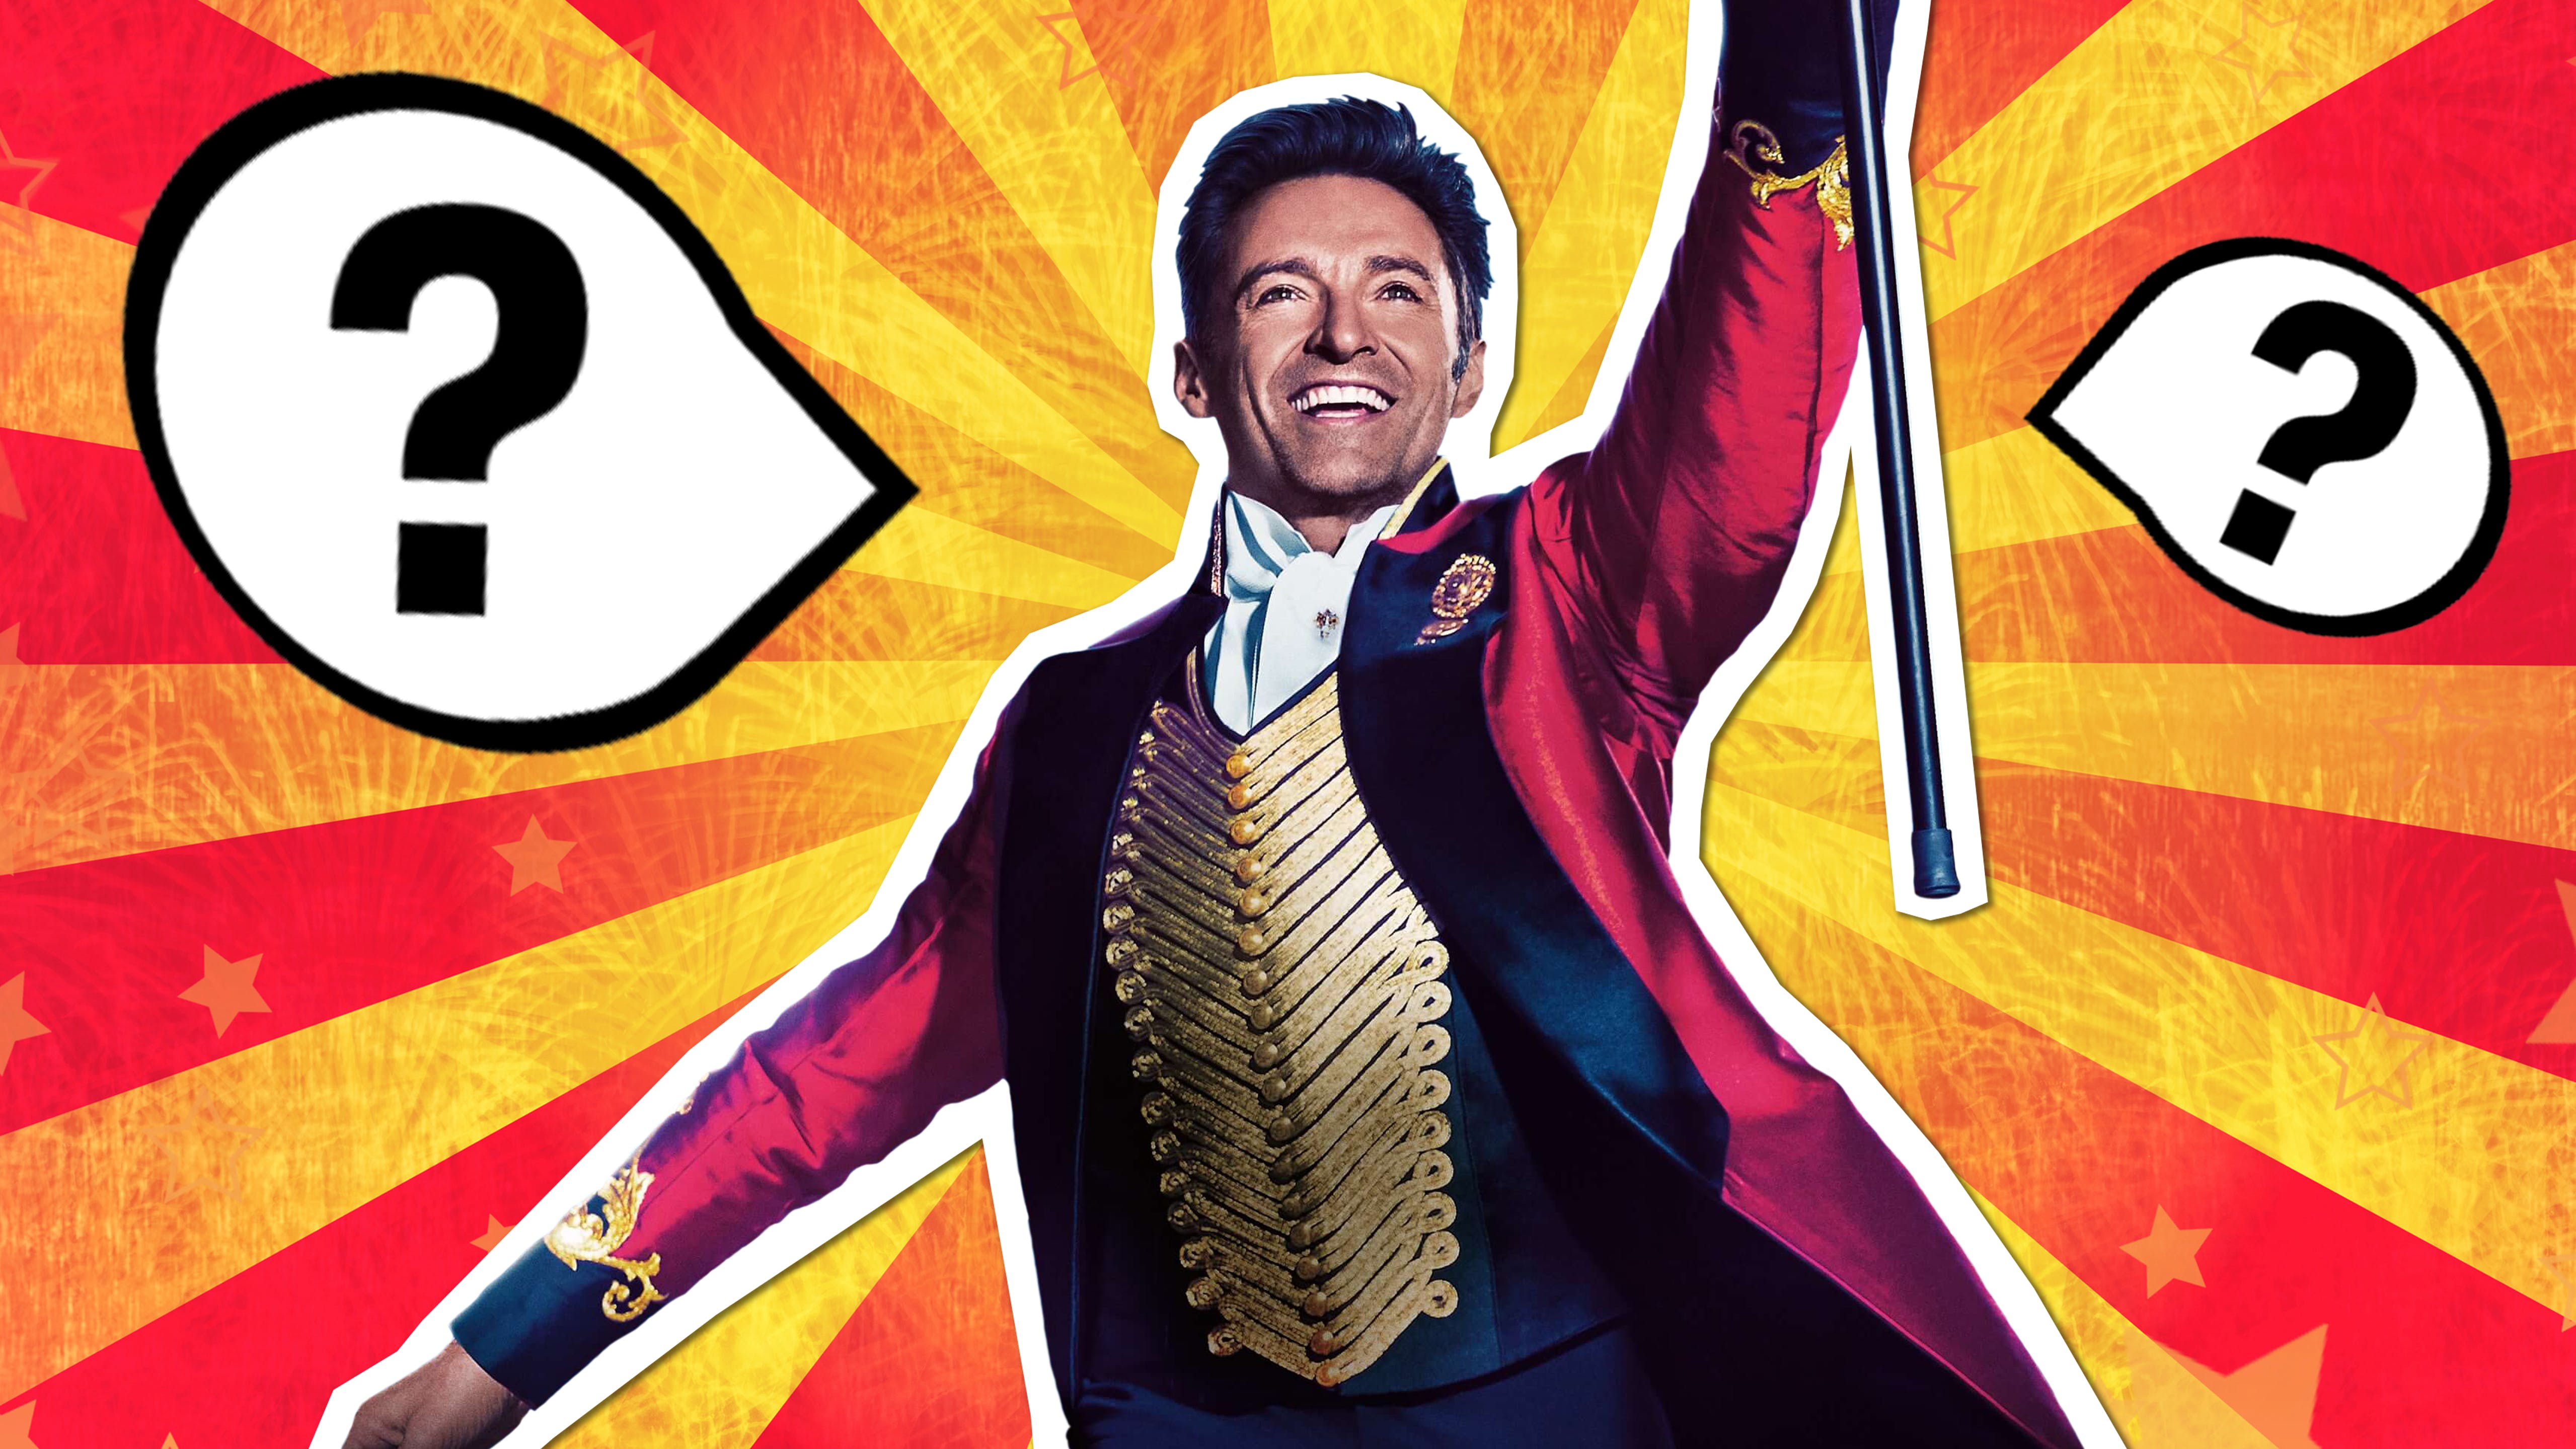 The Greatest Showman lyrics quiz - Hugh Jackman in costume with question marks in place of lyrics